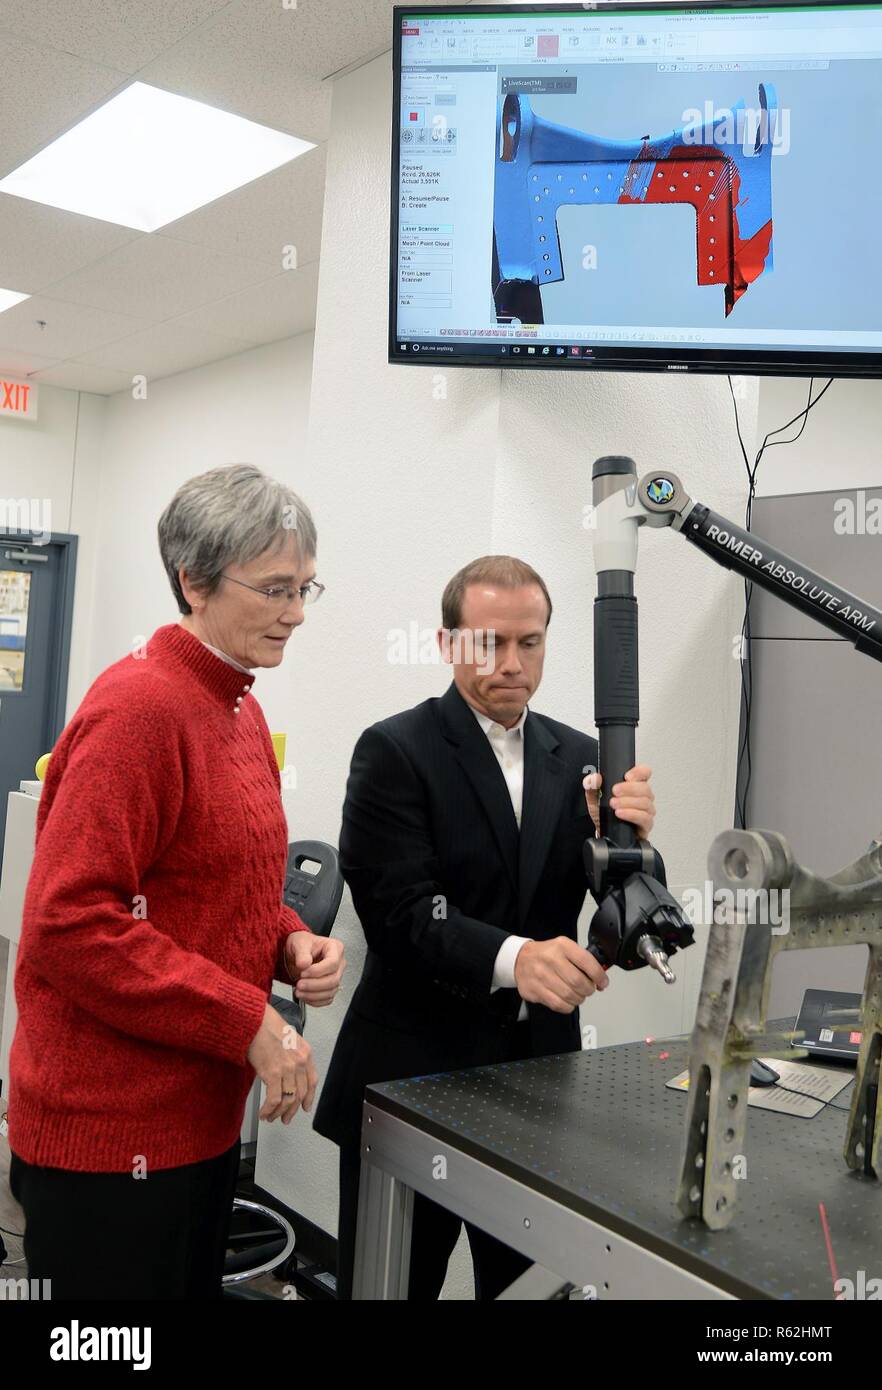 Nathan Pitcovich, Reverse Engineering and Critical Tooling Lab engineer, demonstrates a Romer Arm, which scans parts, to Secretary of the Air Force Heather Wilson, during her visit to Tinker Air Force Base Nov. 16. Wilson toured centers for innovation like the REACT lab and met with personnel responsible for sustaining the Air Force’s fleet of tanker, bomber and transport aircraft. Stock Photo